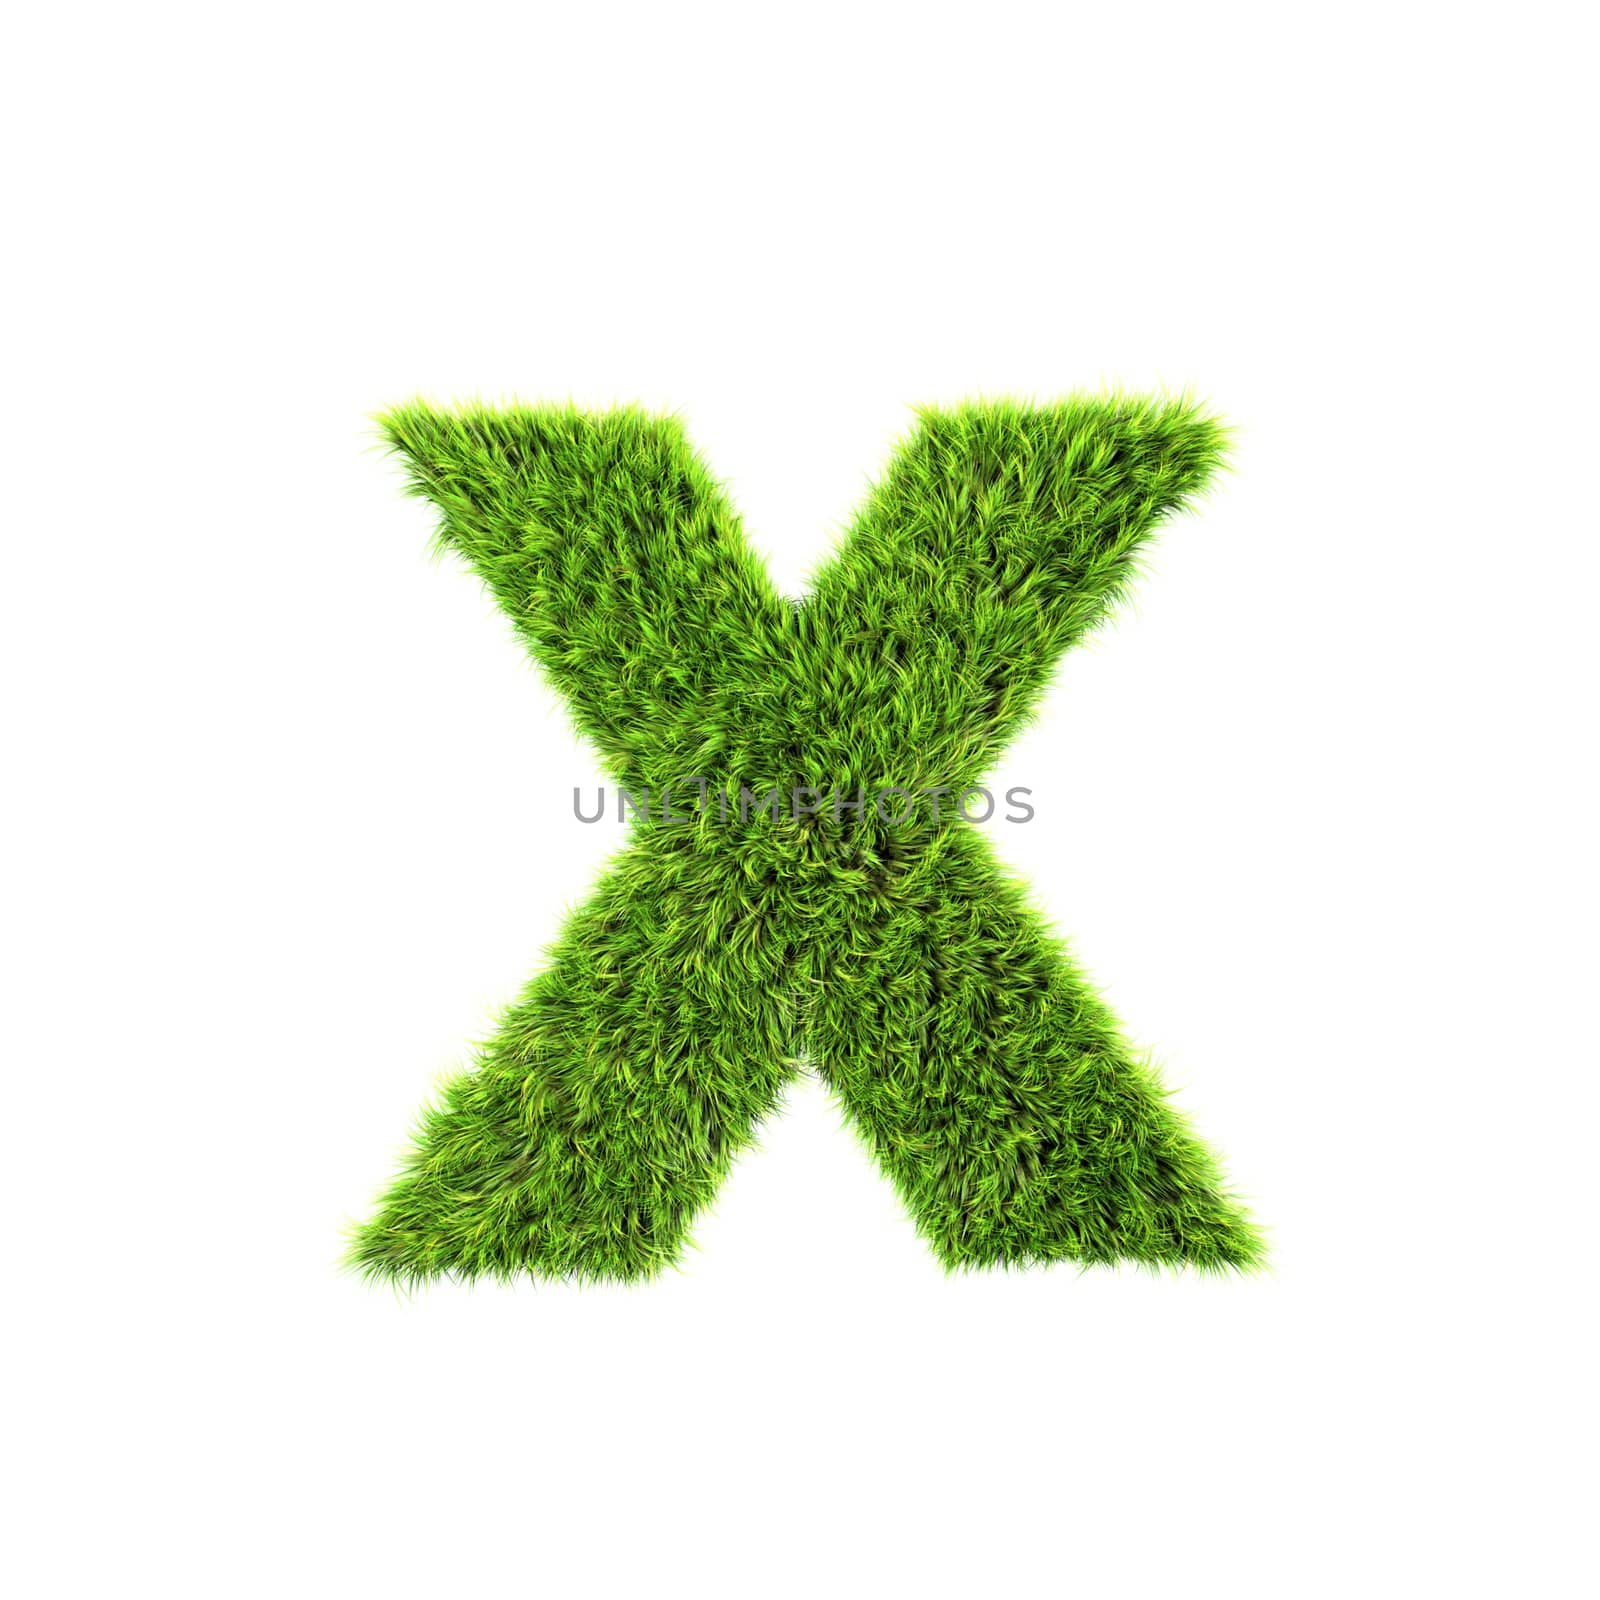 3d grass letter isolated on white background - x by chrisroll